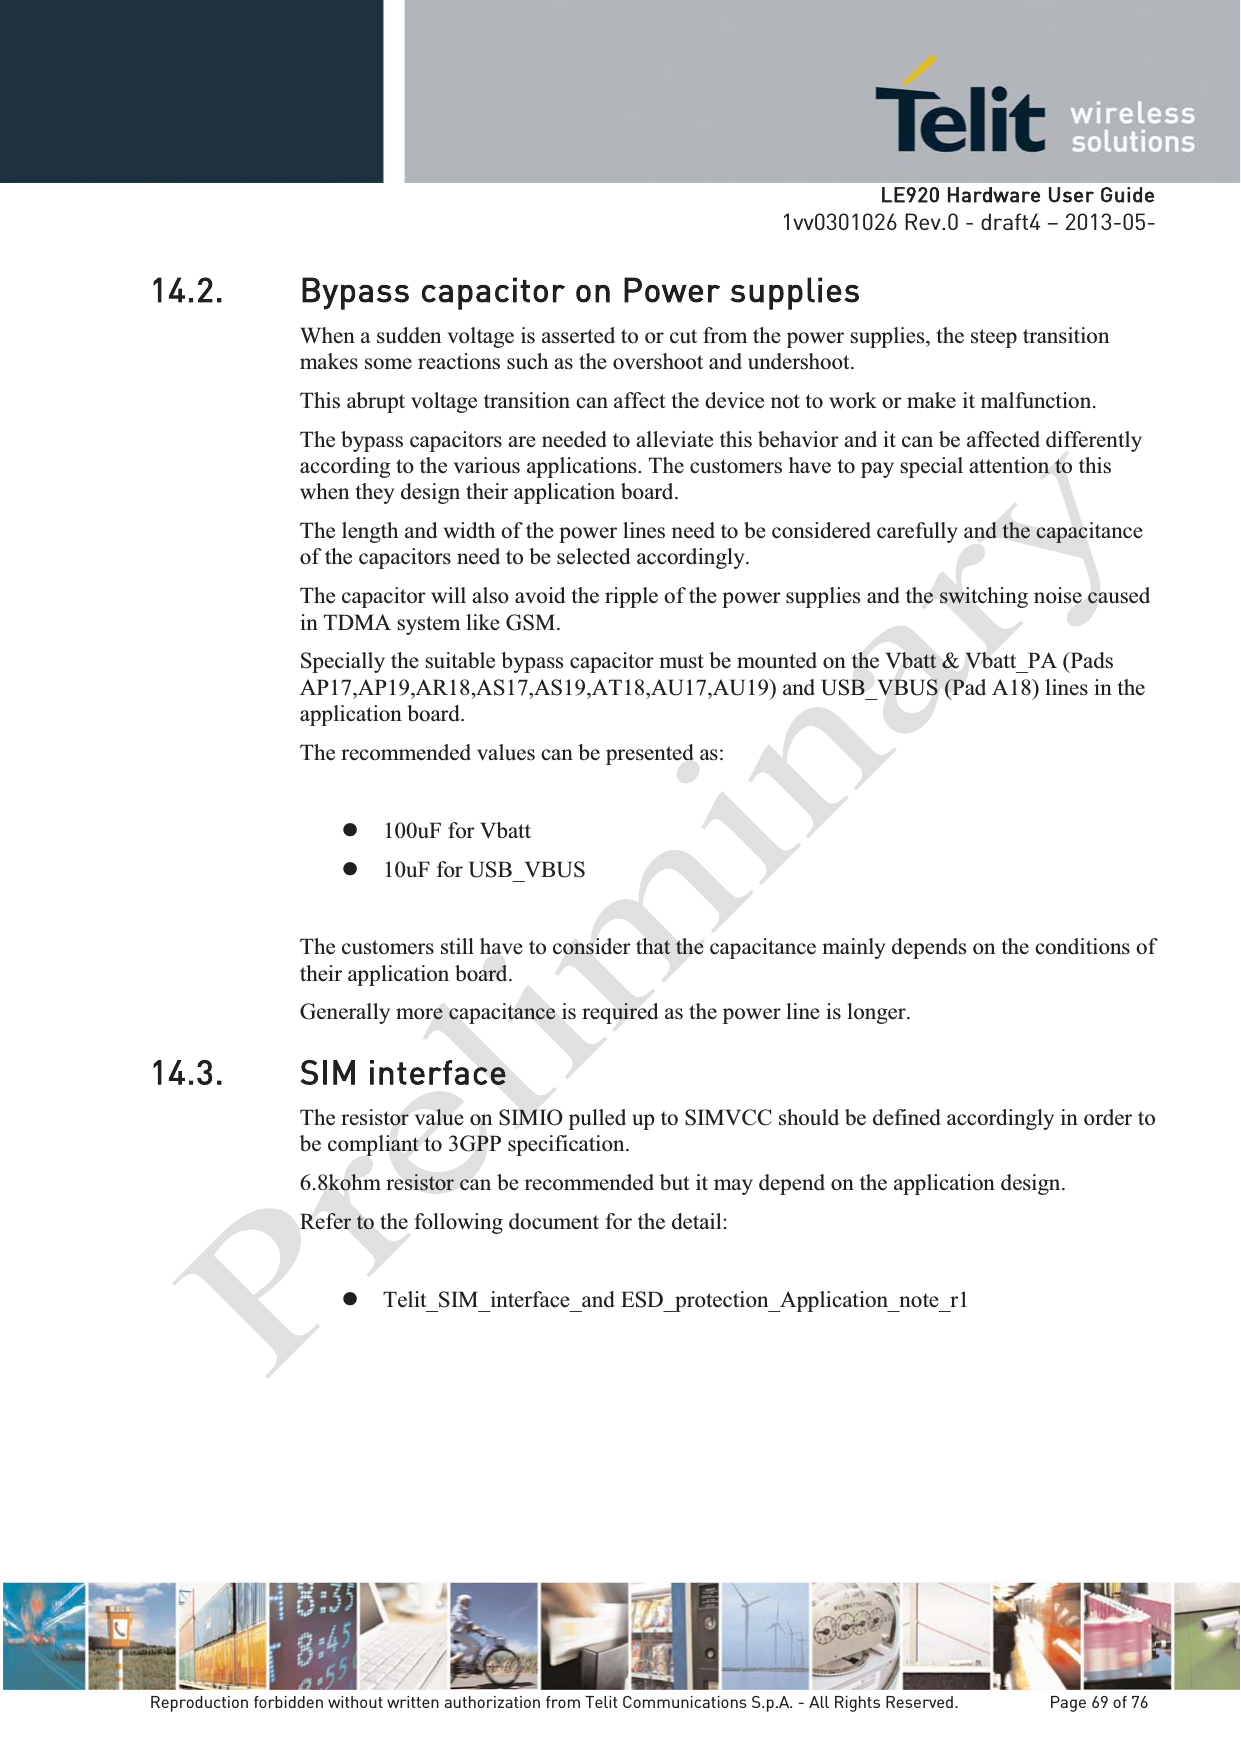   LLE920 Hardware User Guide1vv0301026 Rev.0 - draft4 – 2013-05-Reproduction forbidden without written authorization from Telit Communications S.p.A. - All Rights Reserved.    Page 69 of 76 14.2. Bypass capacitor on Power supplies When a sudden voltage is asserted to or cut from the power supplies, the steep transition makes some reactions such as the overshoot and undershoot. This abrupt voltage transition can affect the device not to work or make it malfunction. The bypass capacitors are needed to alleviate this behavior and it can be affected differently according to the various applications. The customers have to pay special attention to this when they design their application board. The length and width of the power lines need to be considered carefully and the capacitance of the capacitors need to be selected accordingly. The capacitor will also avoid the ripple of the power supplies and the switching noise caused in TDMA system like GSM.  Specially the suitable bypass capacitor must be mounted on the Vbatt &amp; Vbatt_PA (Pads AP17,AP19,AR18,AS17,AS19,AT18,AU17,AU19) and USB_VBUS (Pad A18) lines in the application board. The recommended values can be presented as:  z 100uF for Vbatt z 10uF for USB_VBUS  The customers still have to consider that the capacitance mainly depends on the conditions of their application board. Generally more capacitance is required as the power line is longer. 14.3. SIM interface The resistor value on SIMIO pulled up to SIMVCC should be defined accordingly in order to be compliant to 3GPP specification. 6.8kohm resistor can be recommended but it may depend on the application design. Refer to the following document for the detail:  z Telit_SIM_interface_and ESD_protection_Application_note_r1      